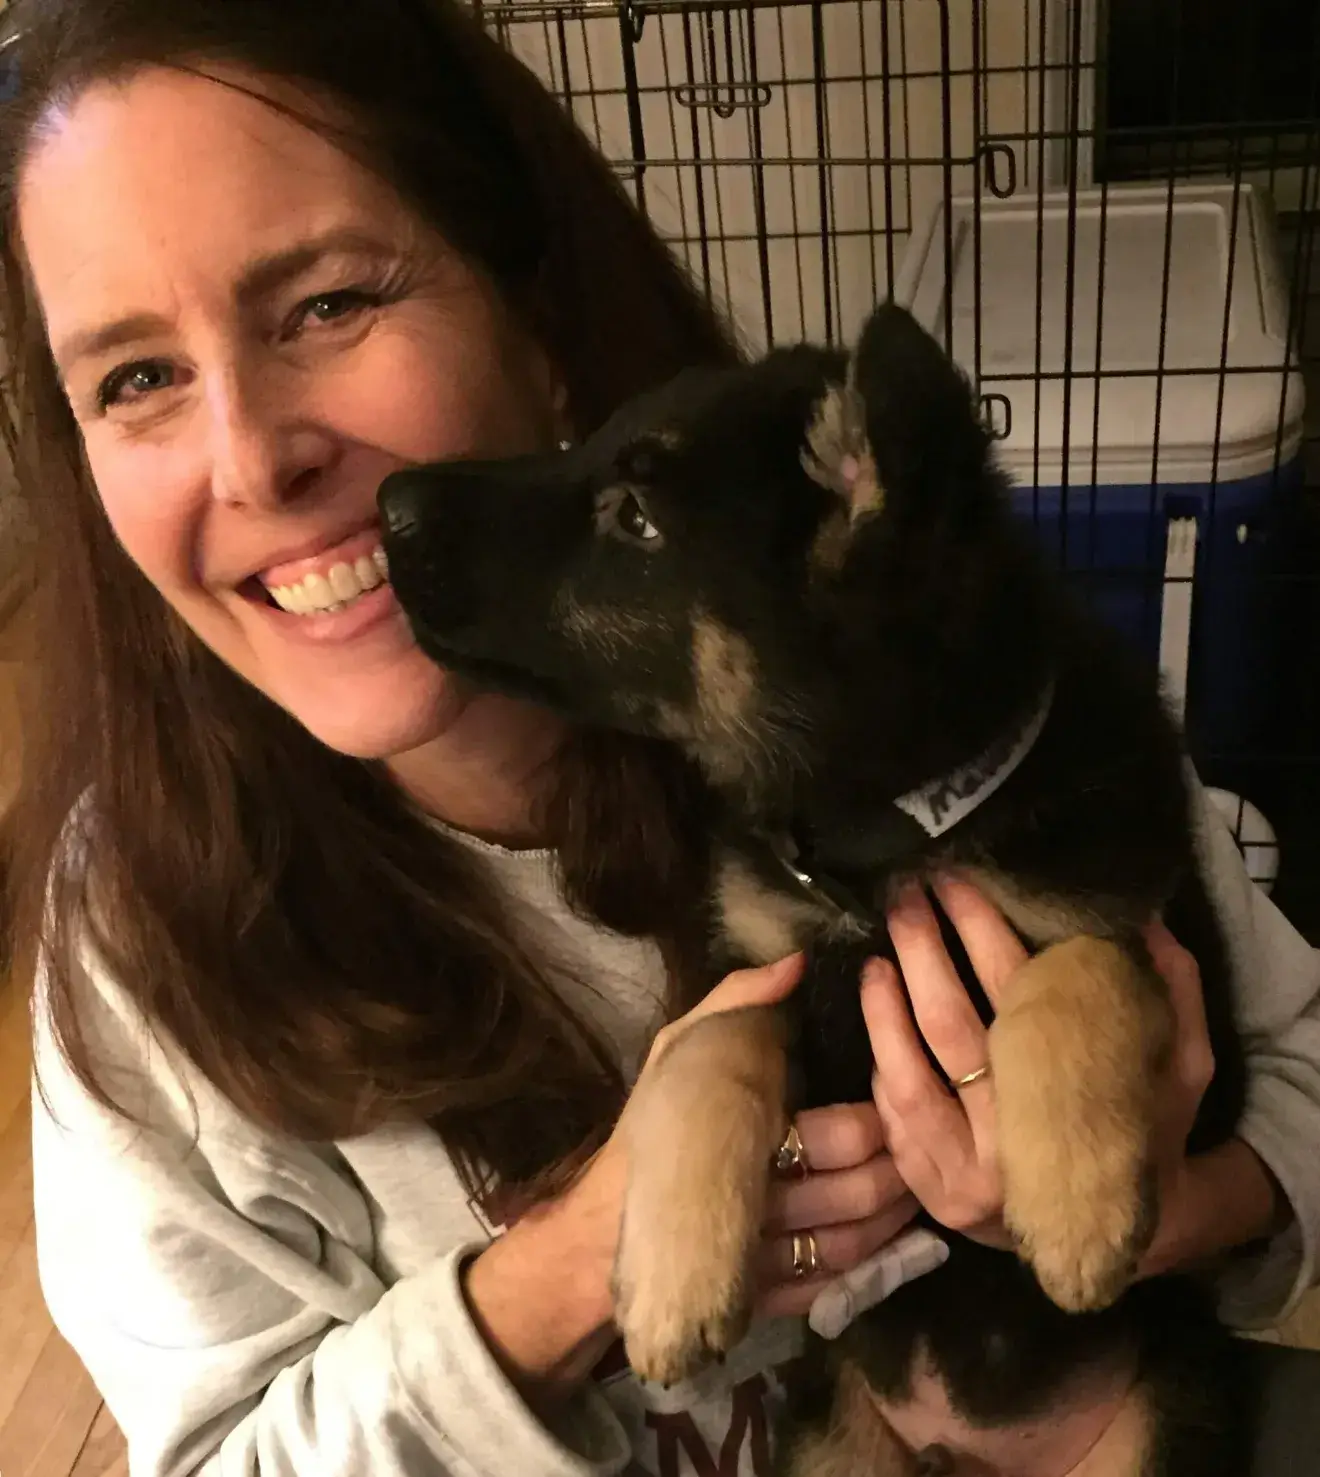 Amy smiles while holding black and tan German shepherd puppy Maverick in her arms. Maverick turns his head to give Amy a kiss on her face.